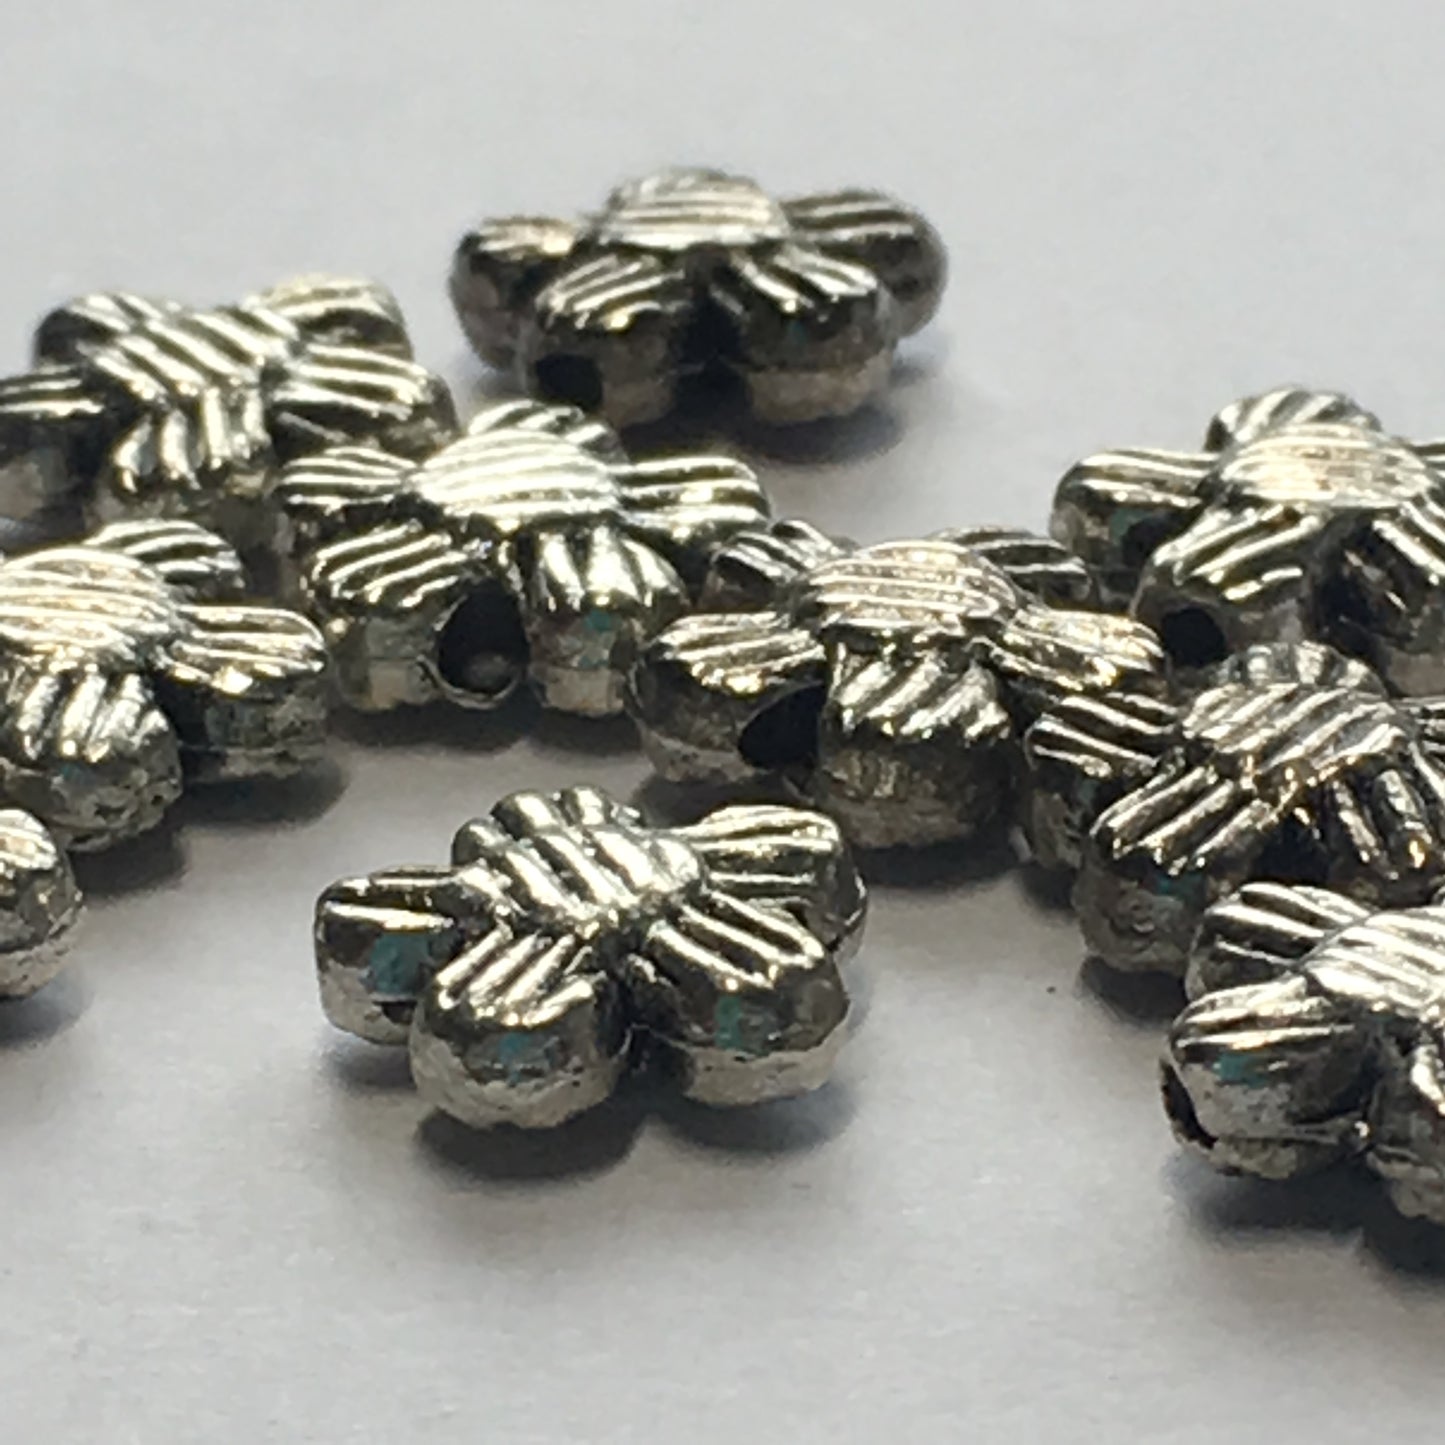 Antique Silver Grooved Flower Beads, 8 x 2 mm - 10 Beads